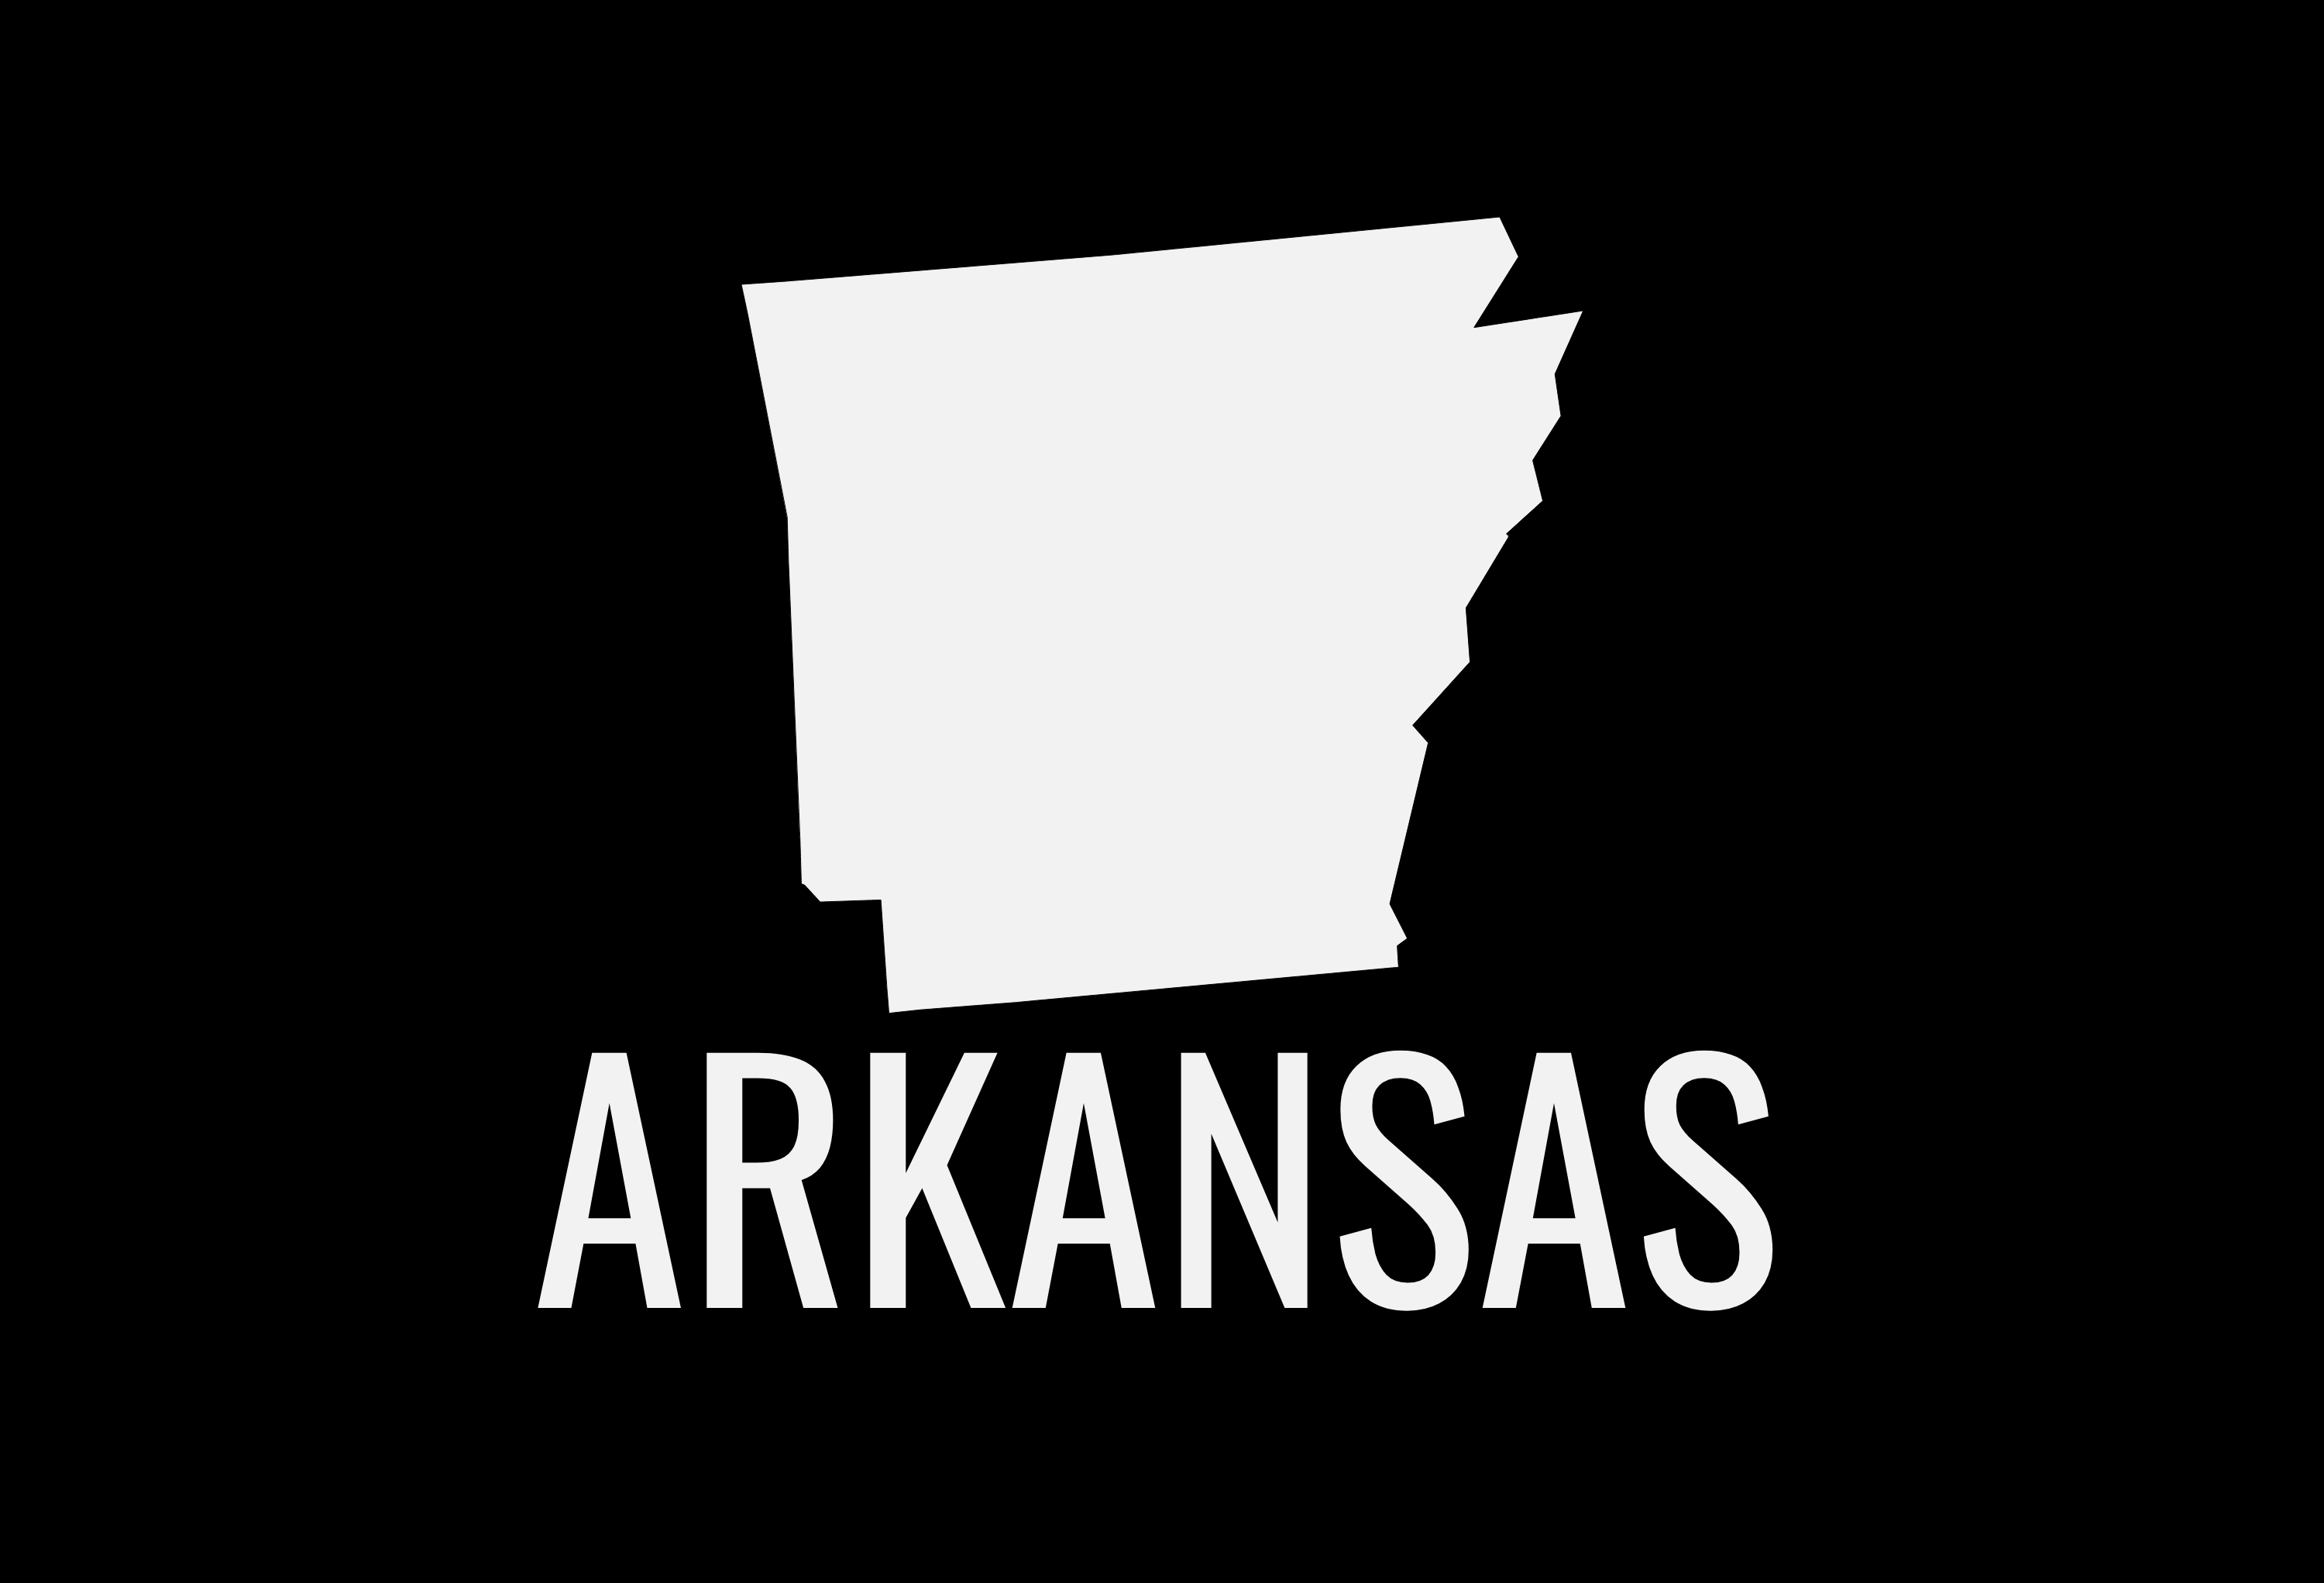 Arkansas State Map Car Decal - Permanent Vinyl Sticker for Cars, Vehicle, Doors, Windows, Laptop, and more!